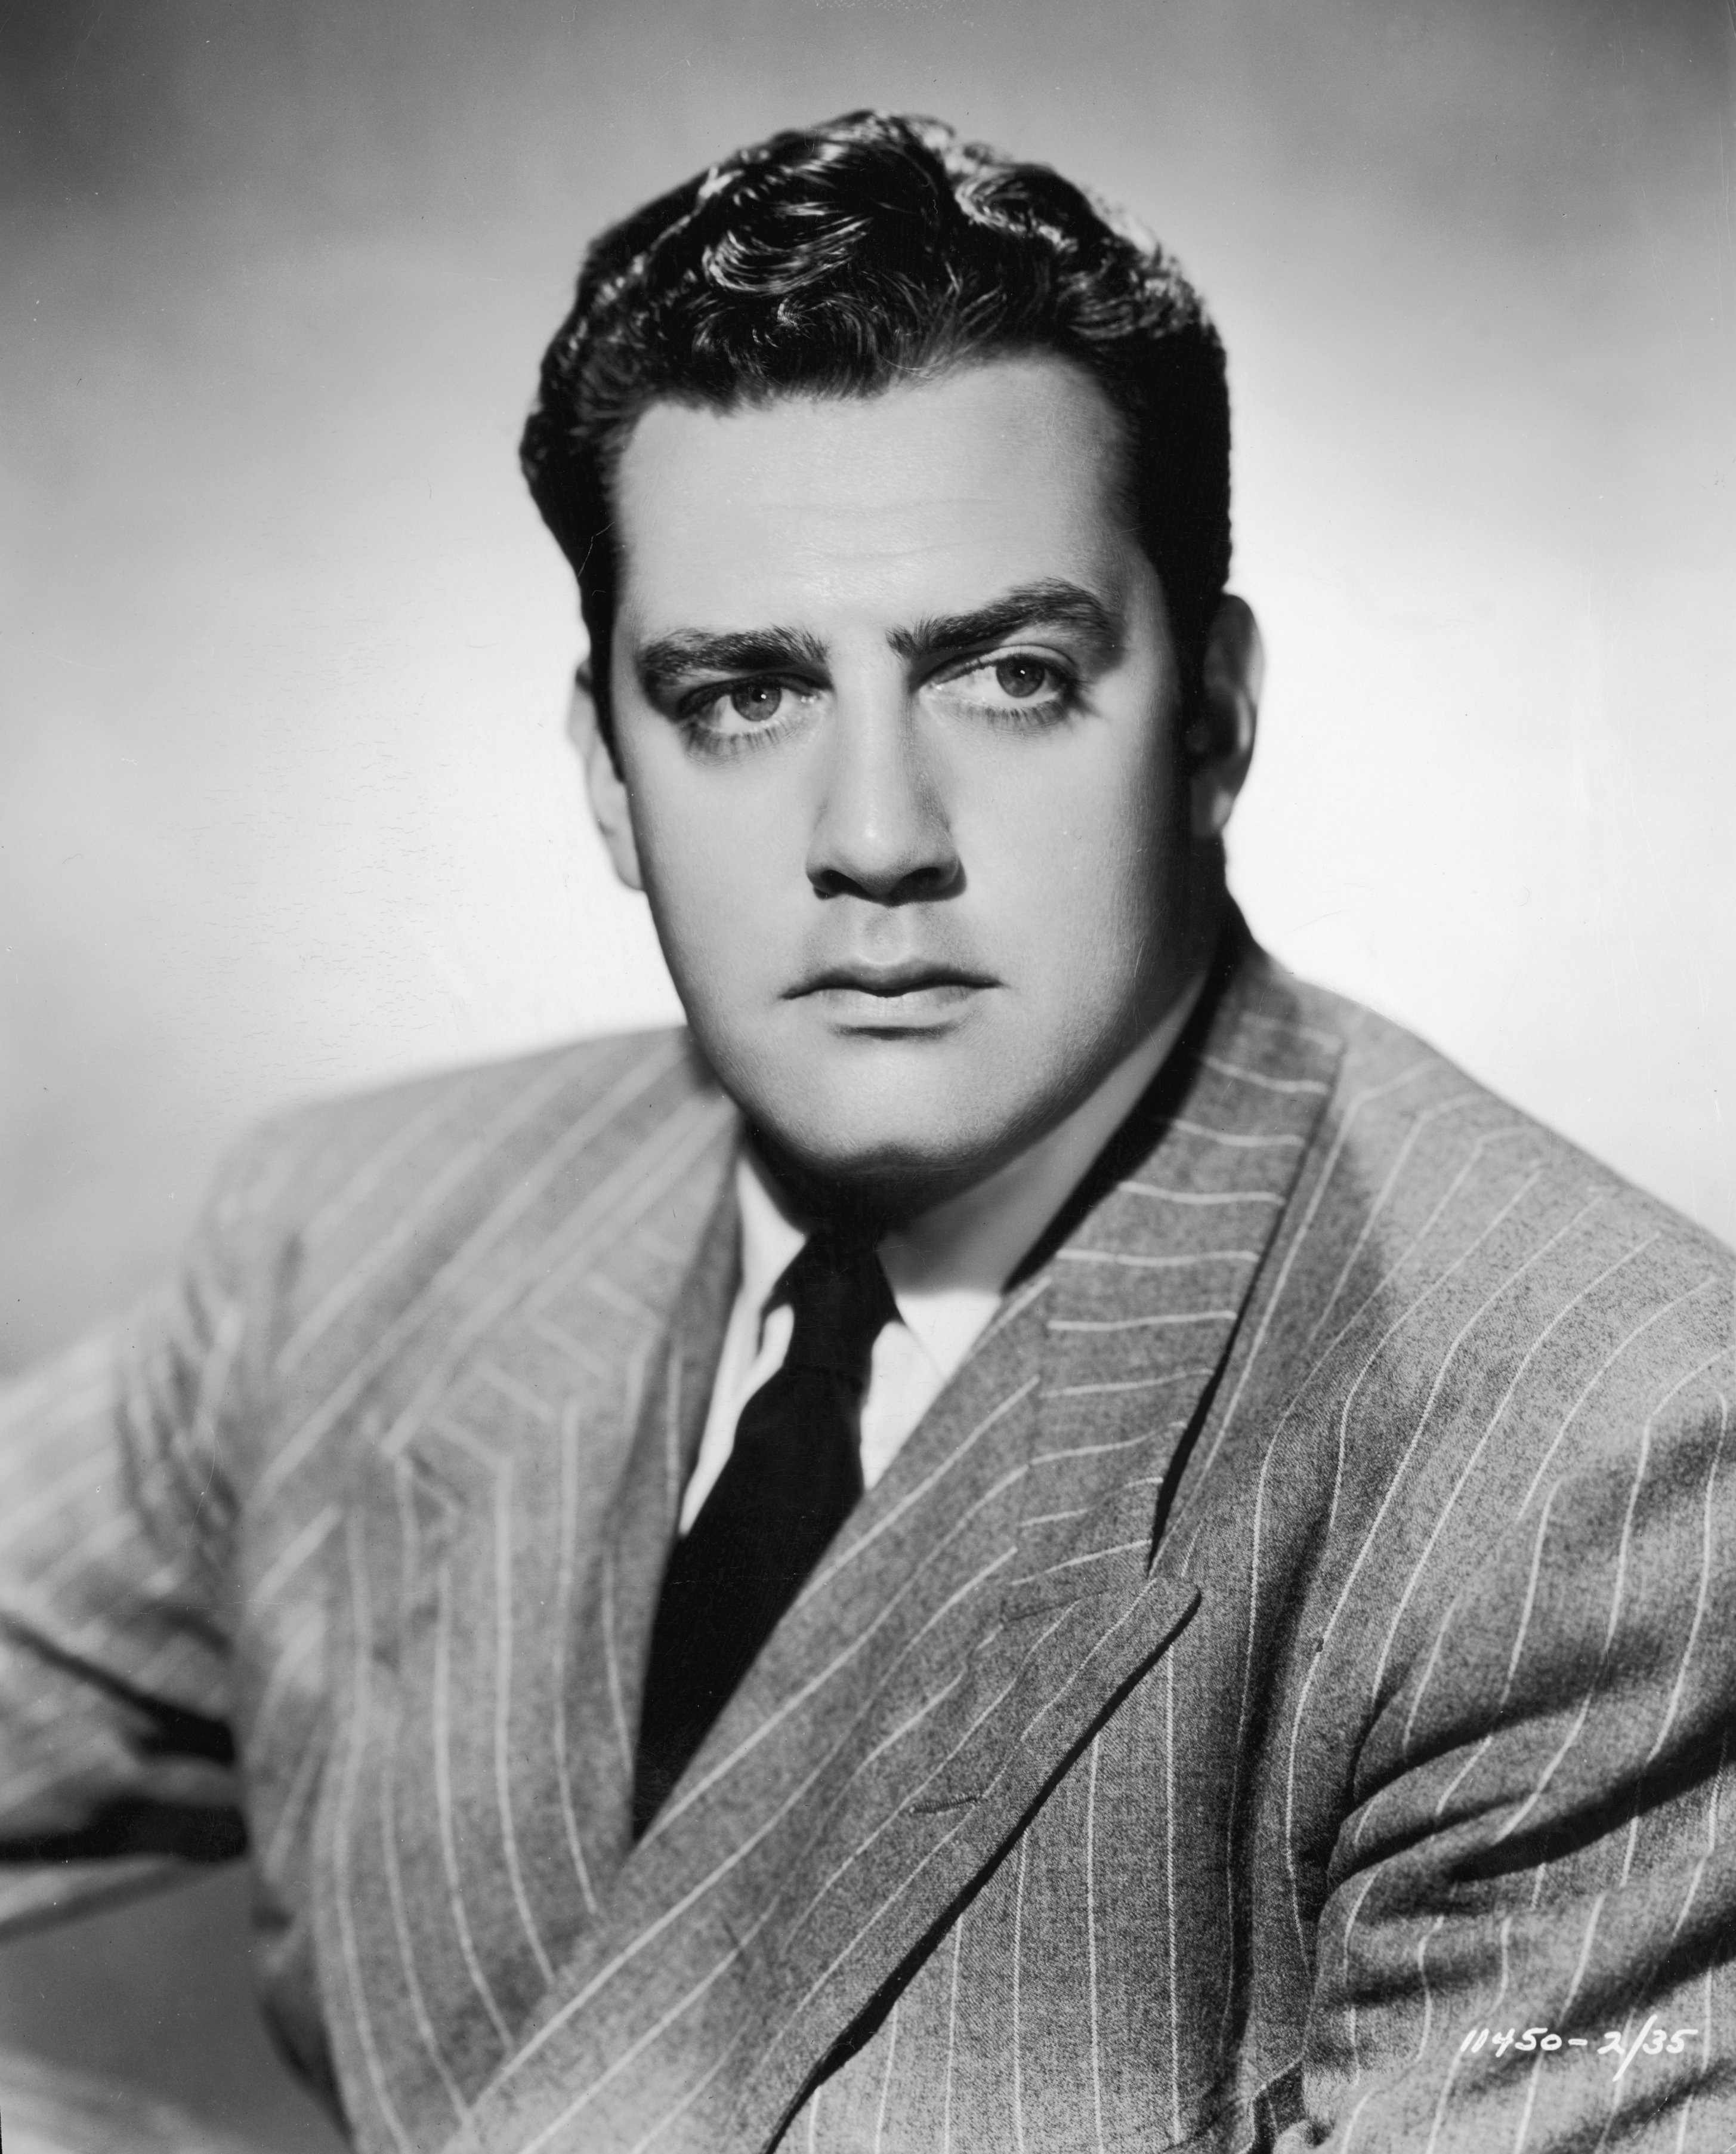 Raymond Burr wearing a pinstriped suit in a promotional headshot for the film, "Bride of Vengeance." / Source: Getty Images